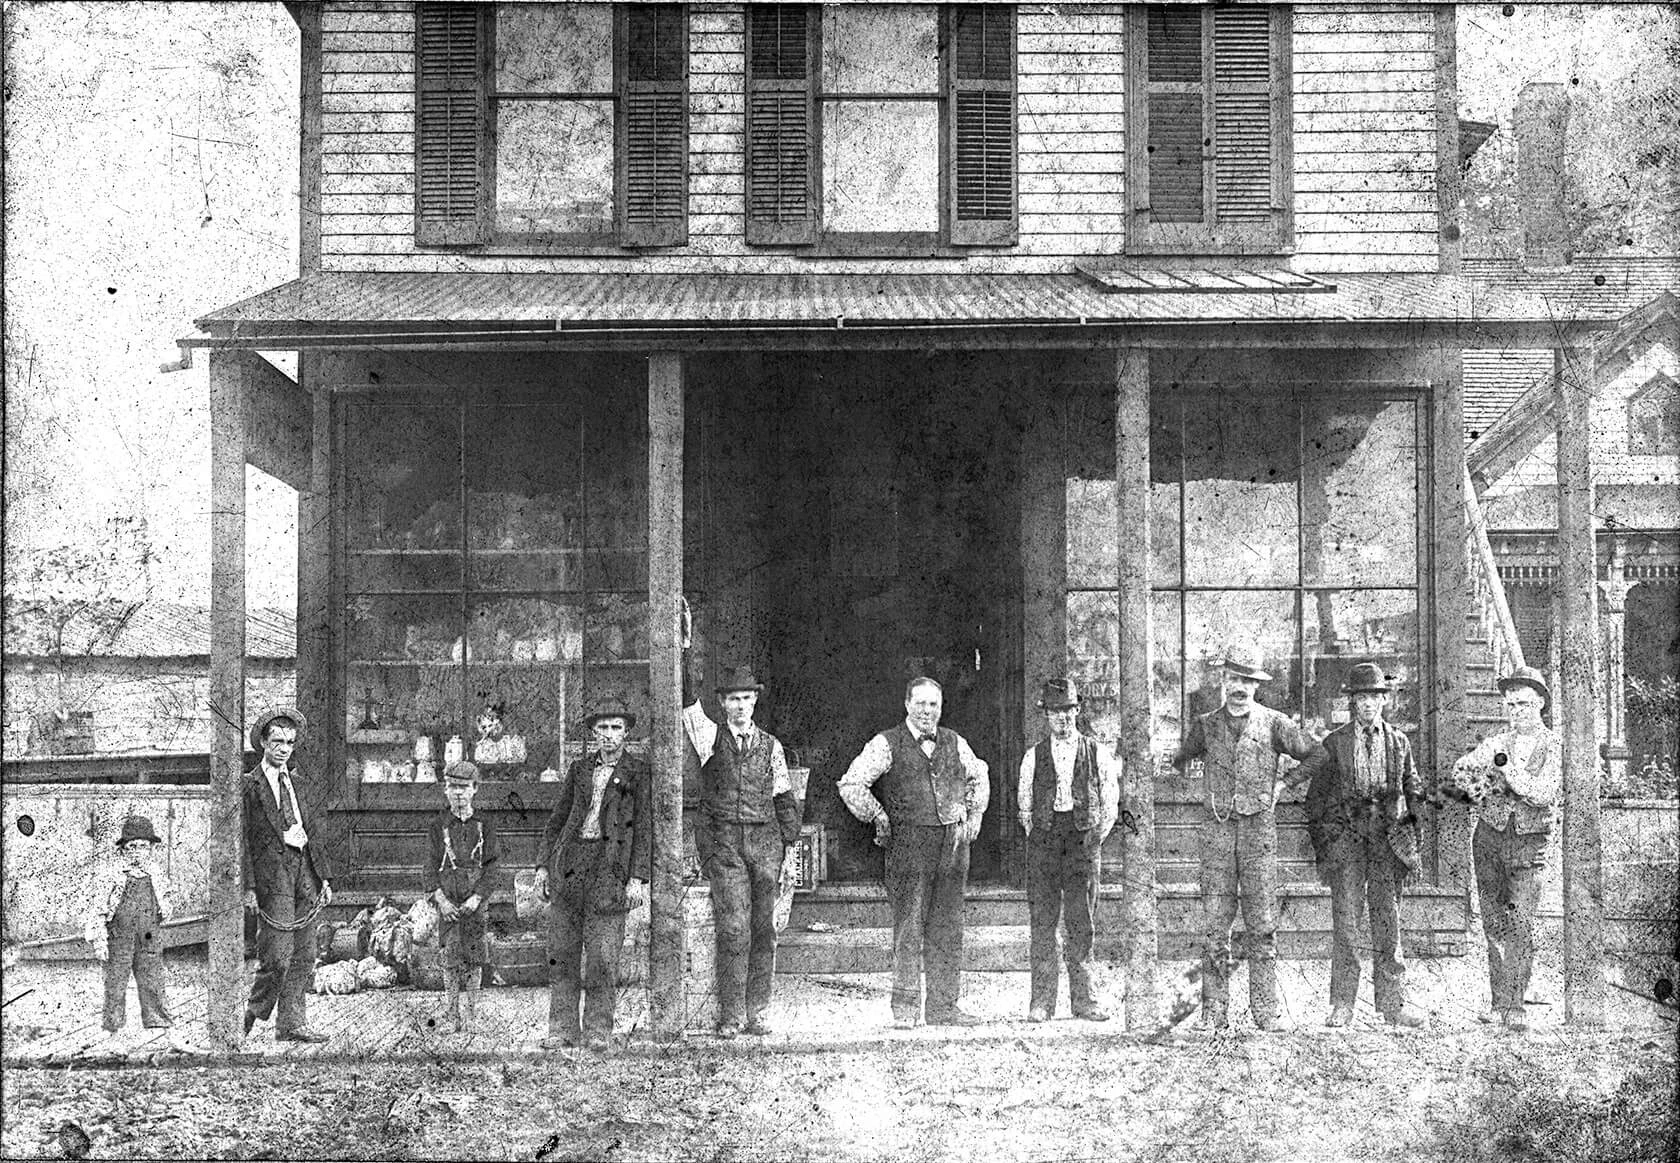 The O’Neil brothers, Daniel and William, are standing in front of their grocery store with their family. It is a two-story wood frame building with a covered front area.